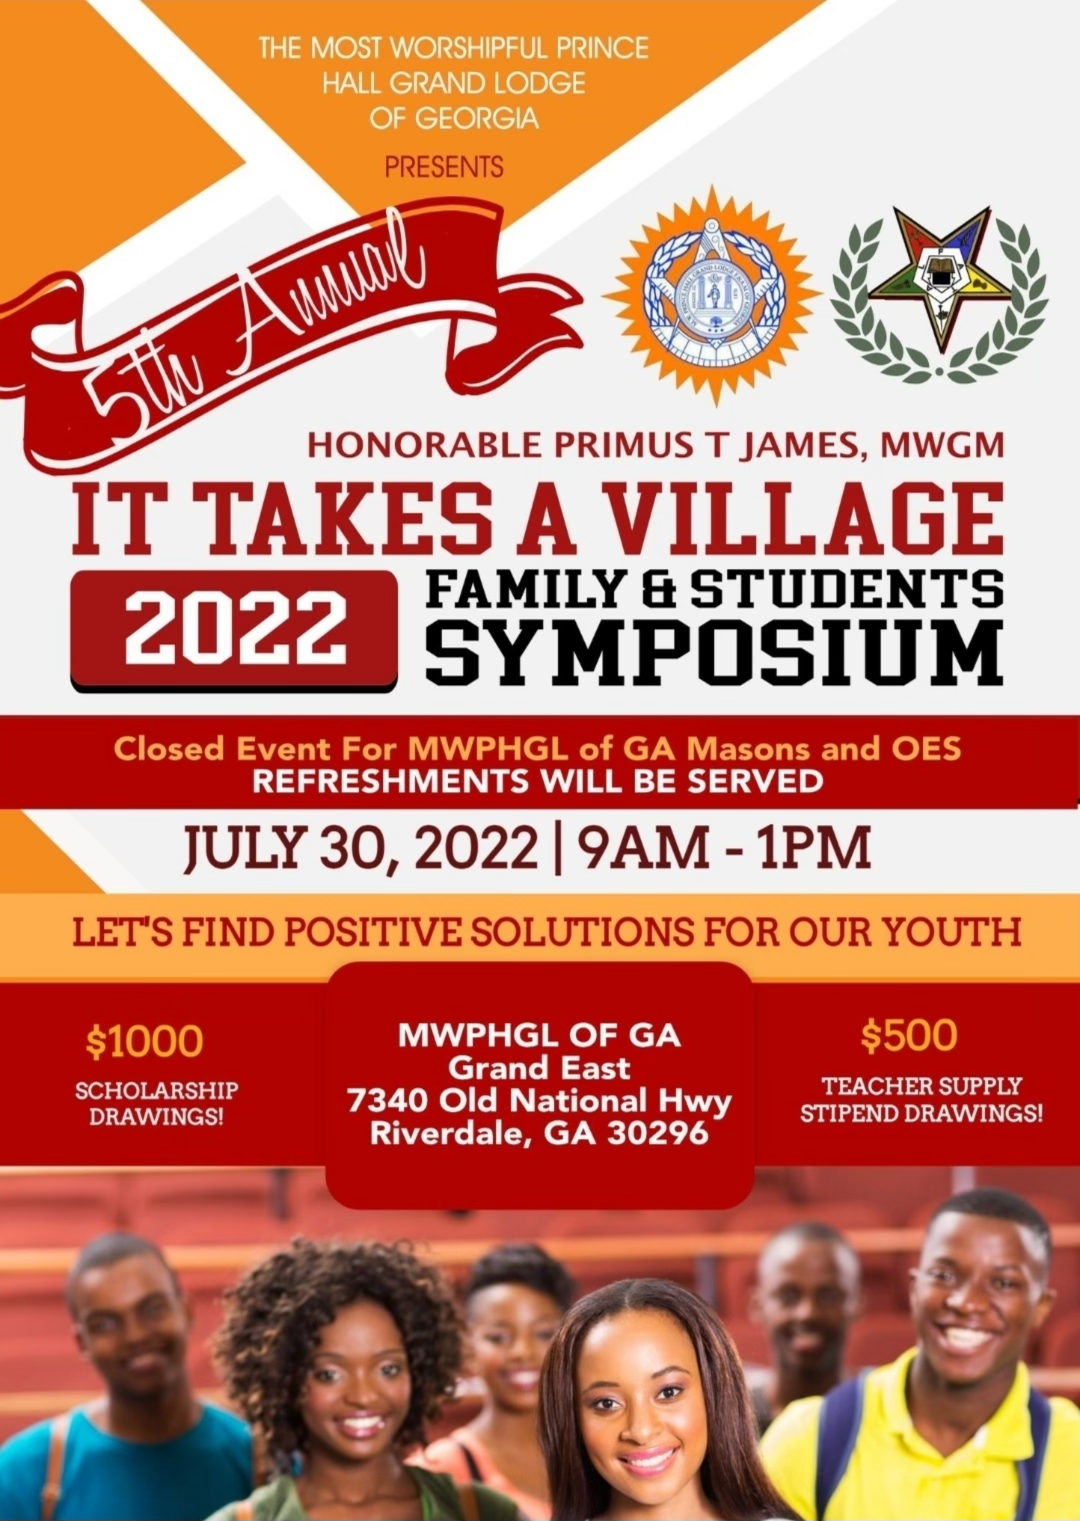 6th ANNUAL IT TAKES A VILLAGE FAMILY & STUDENTS SYMPOSIUM